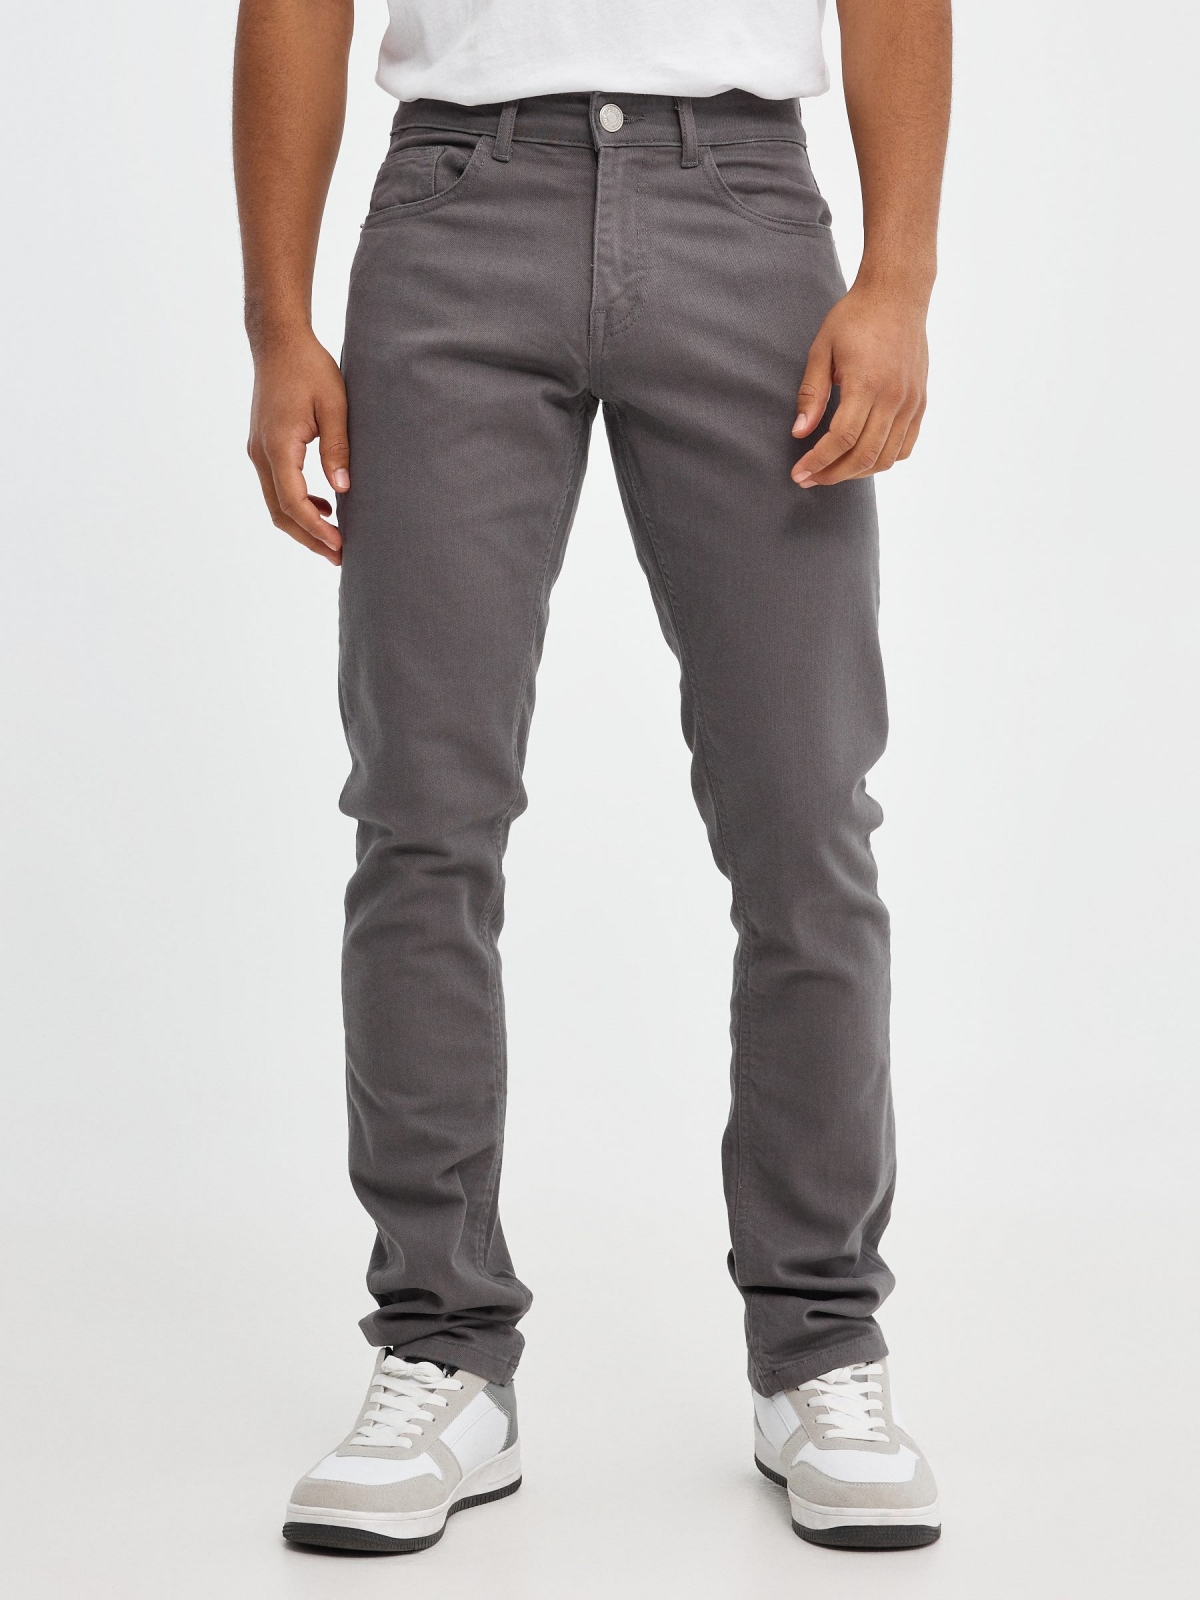 Basic colored jeans grey middle front view